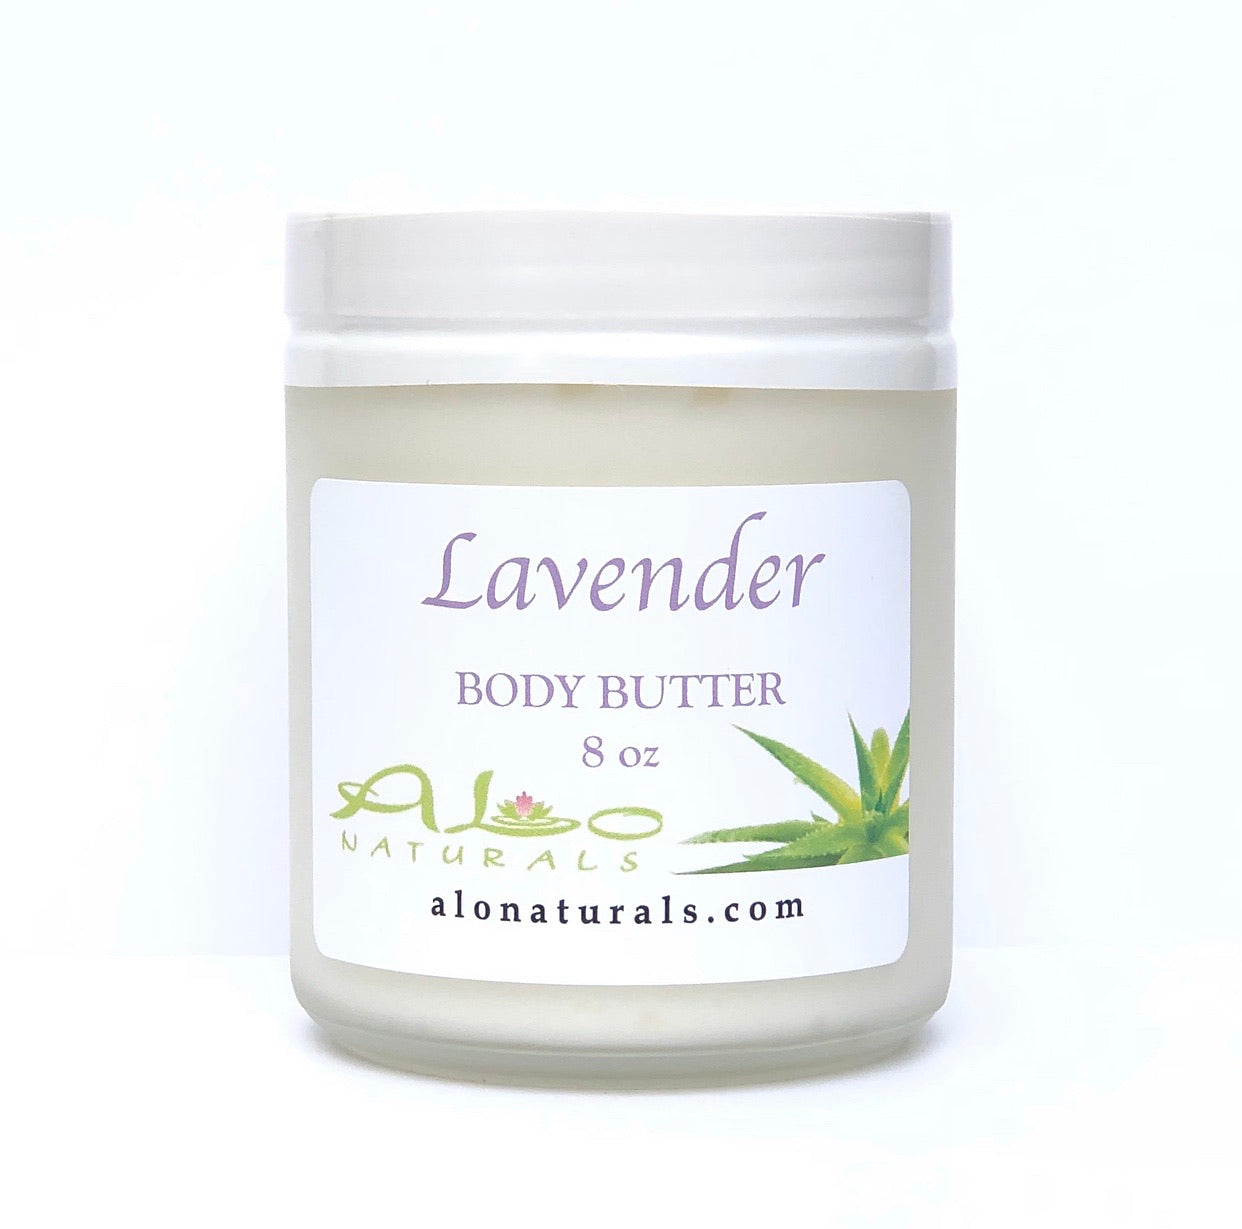 All natural Lemongrass scented body butter.  Formulated to heal and hydrate the skin.  8oz jar.